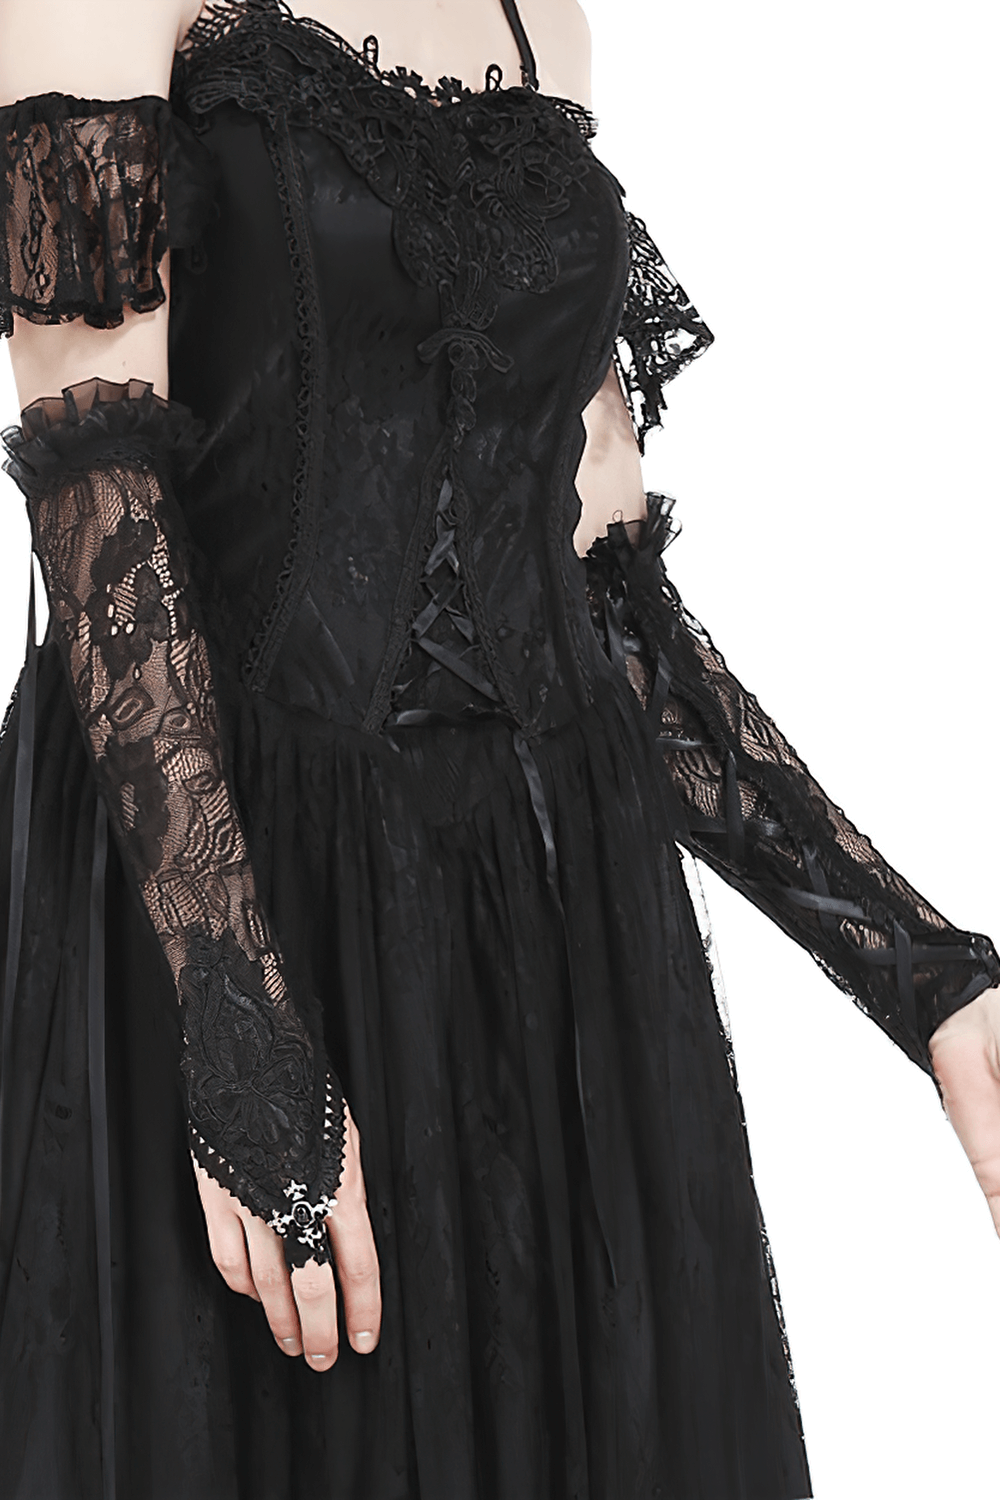 Chic Women's Black Lace Gloves with Satin Ribbons